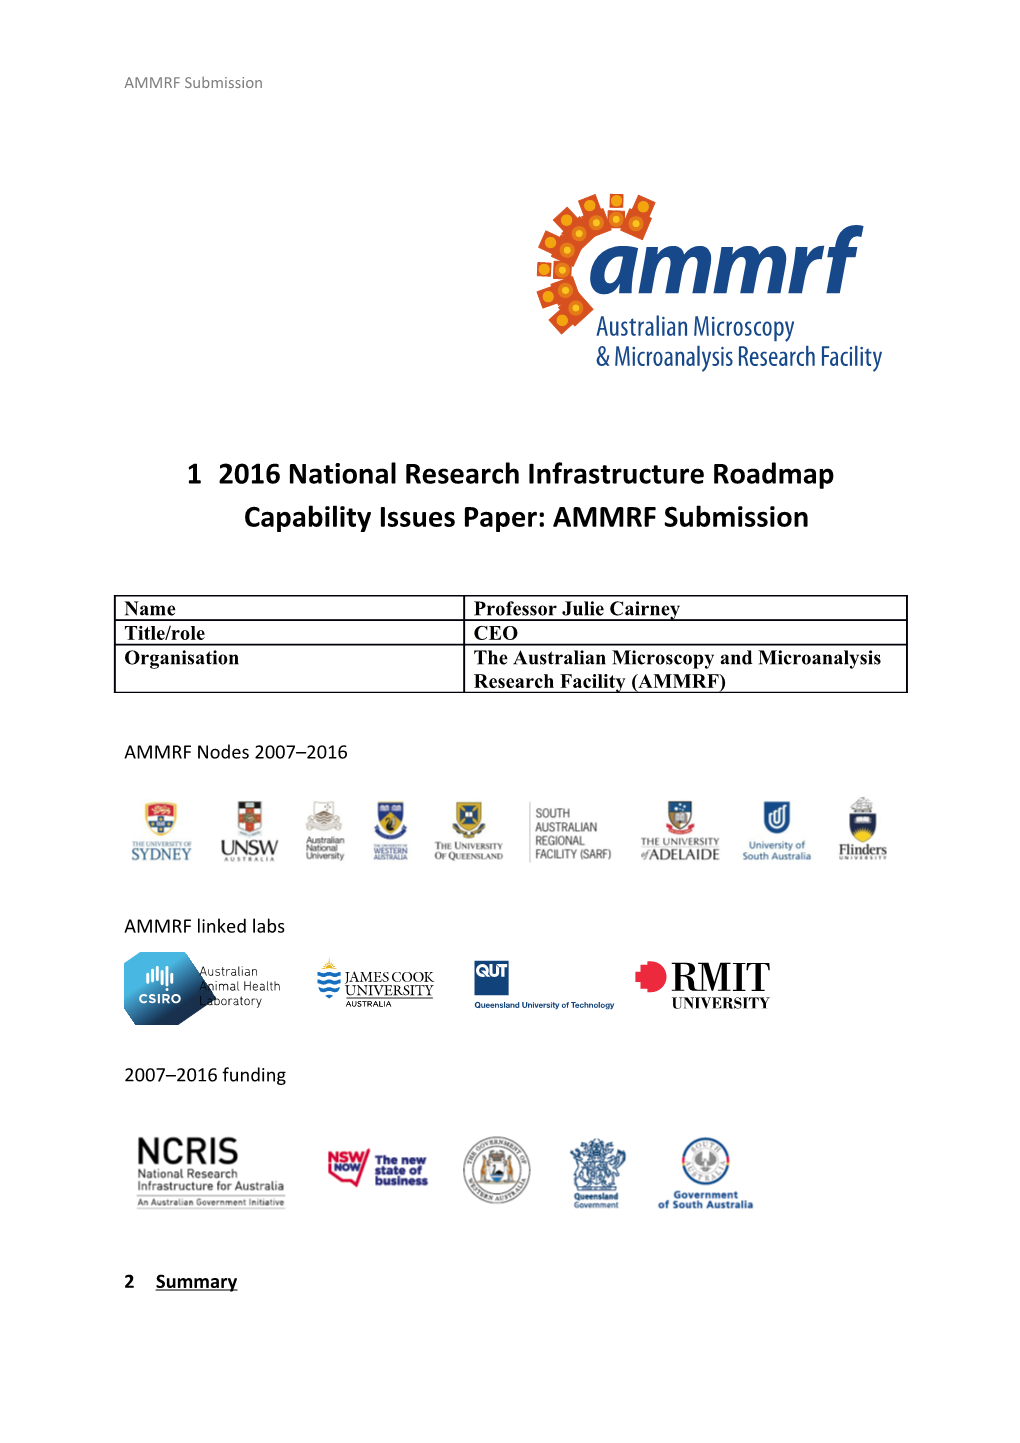 2016 National Research Infrastructure Roadmap Capabilityissues Paper: AMMRF Submission